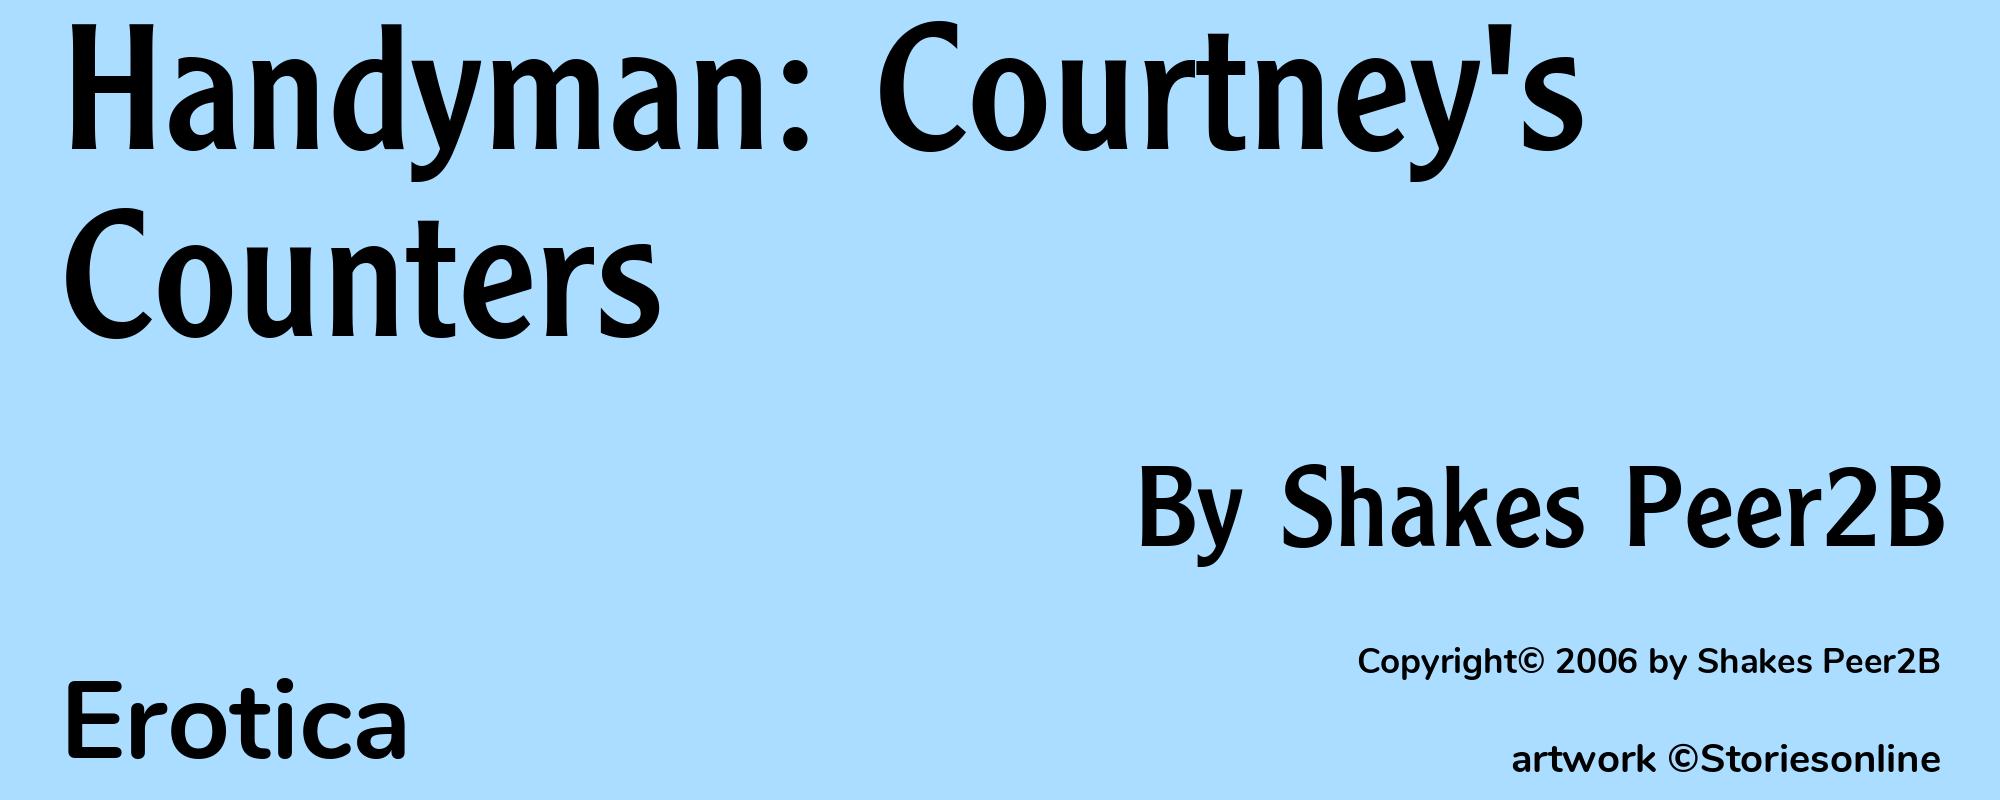 Handyman: Courtney's Counters - Cover